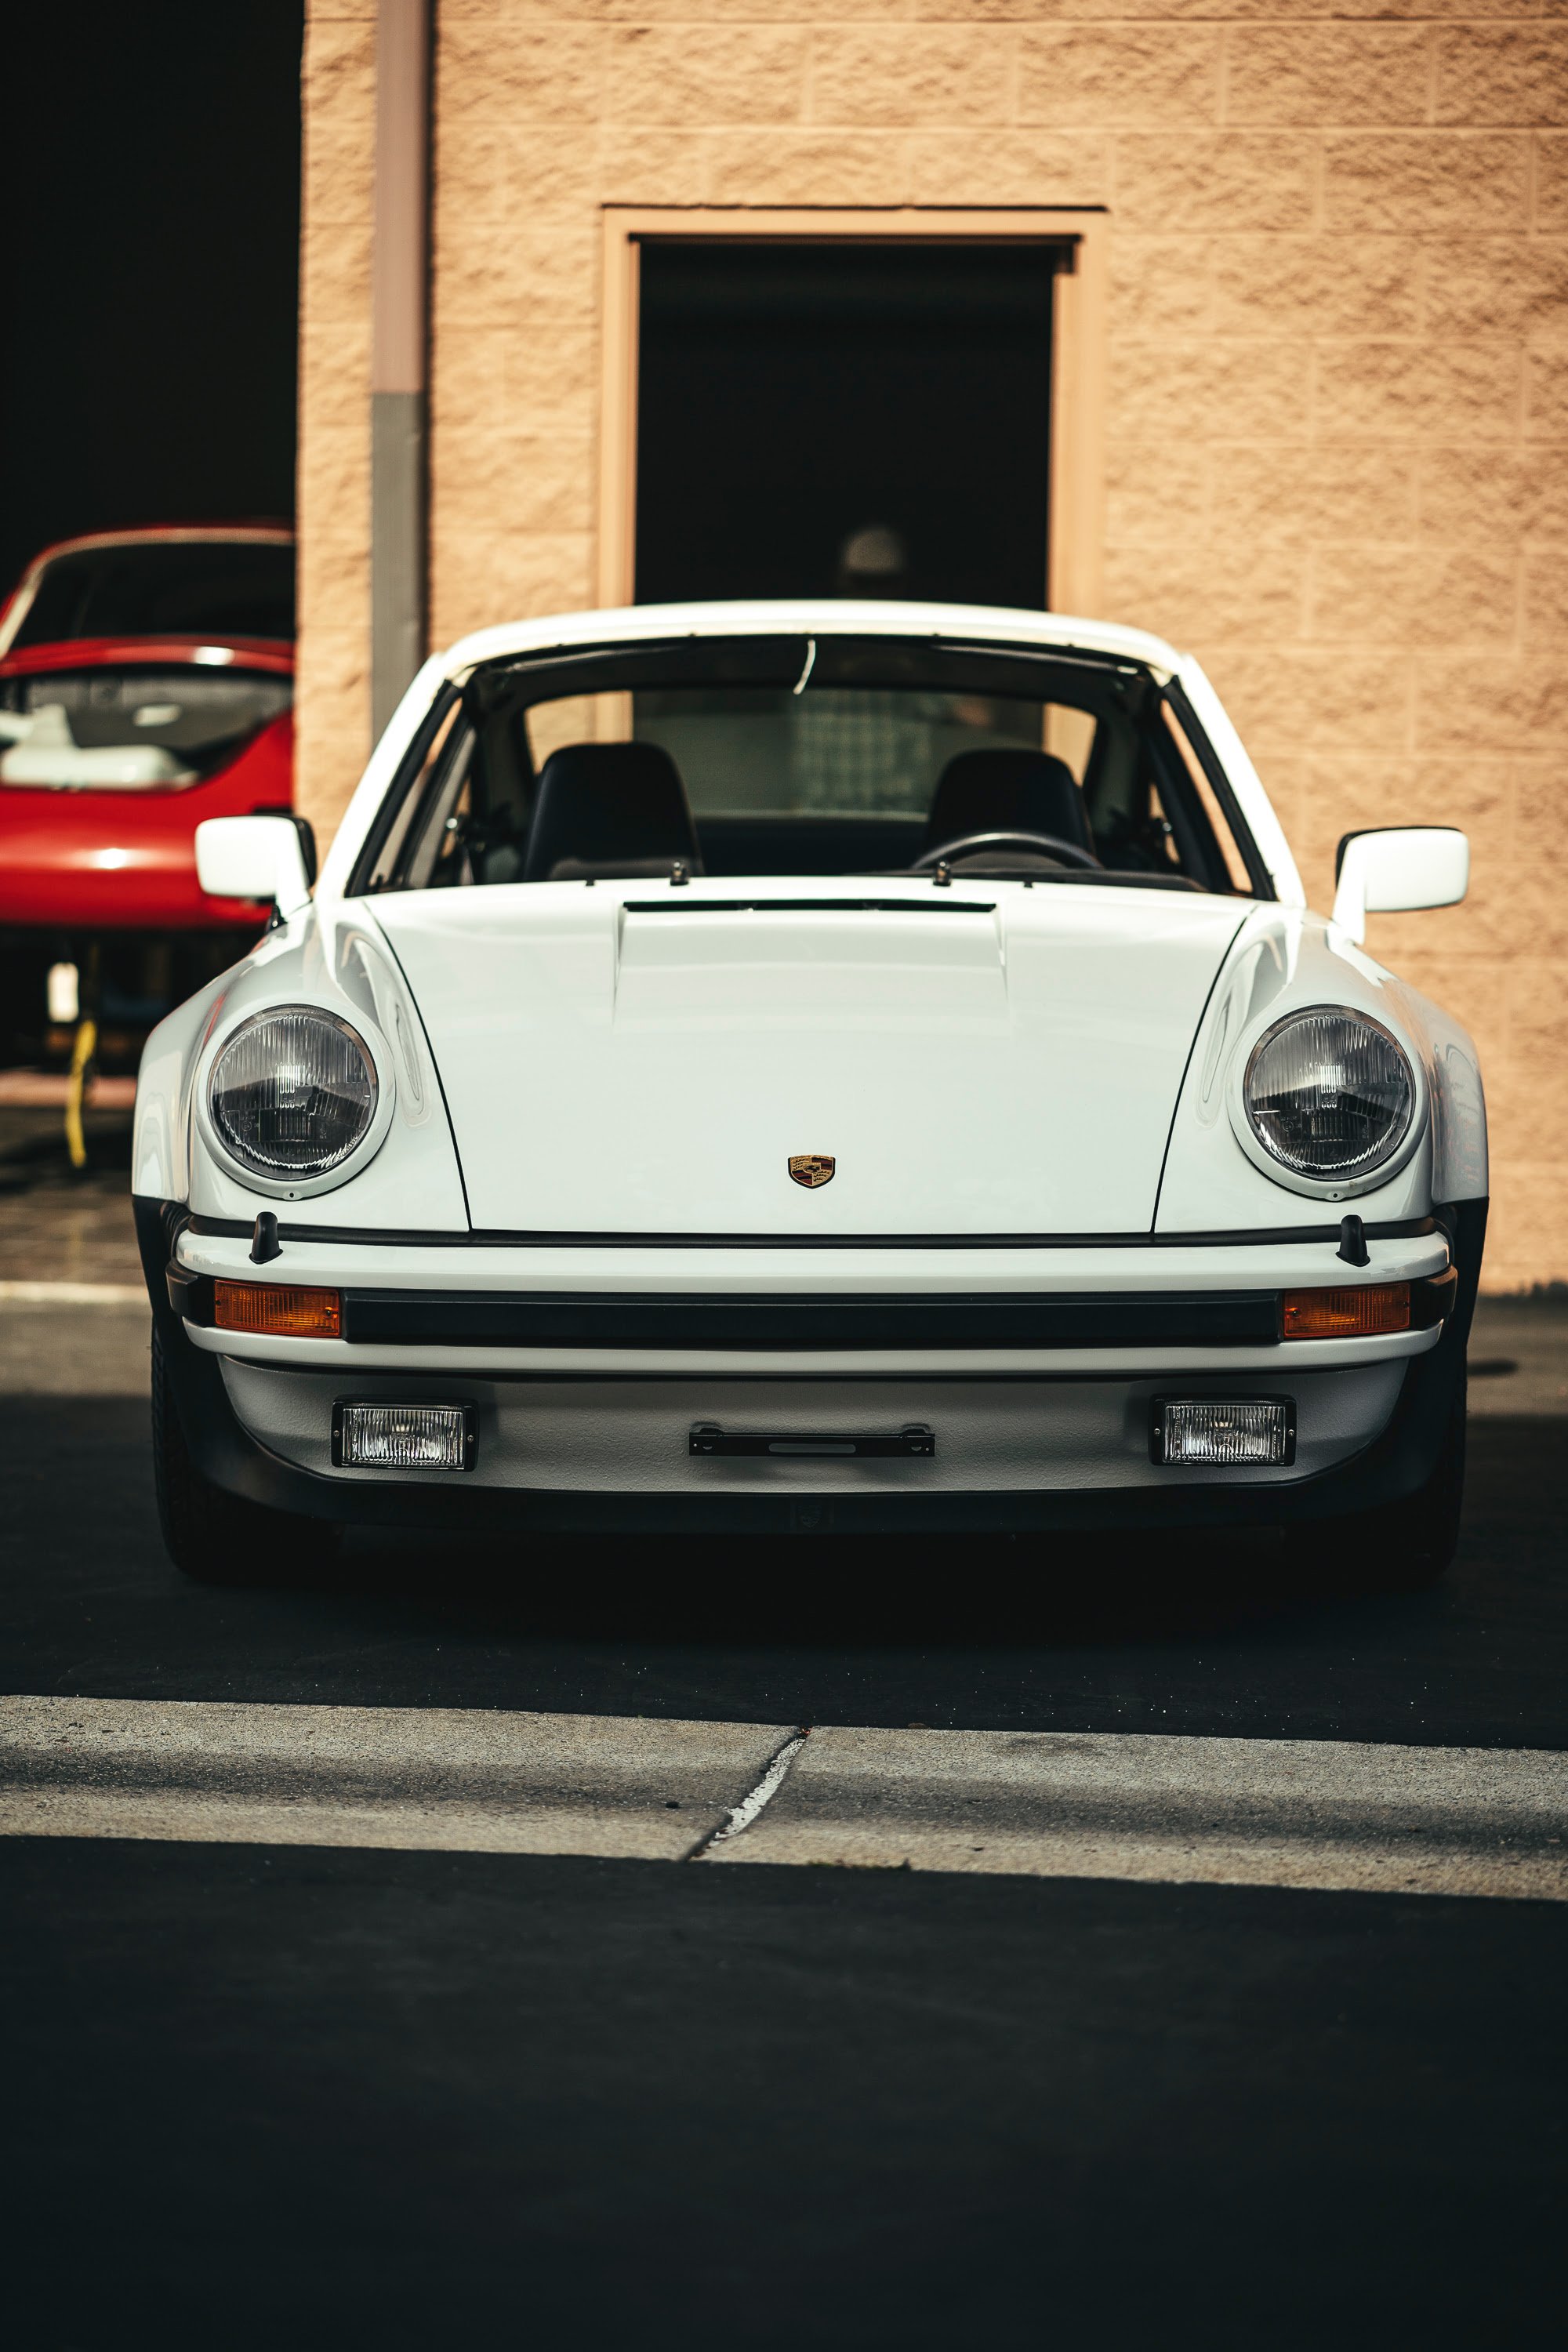 White 911 Turbo on display at CPR.